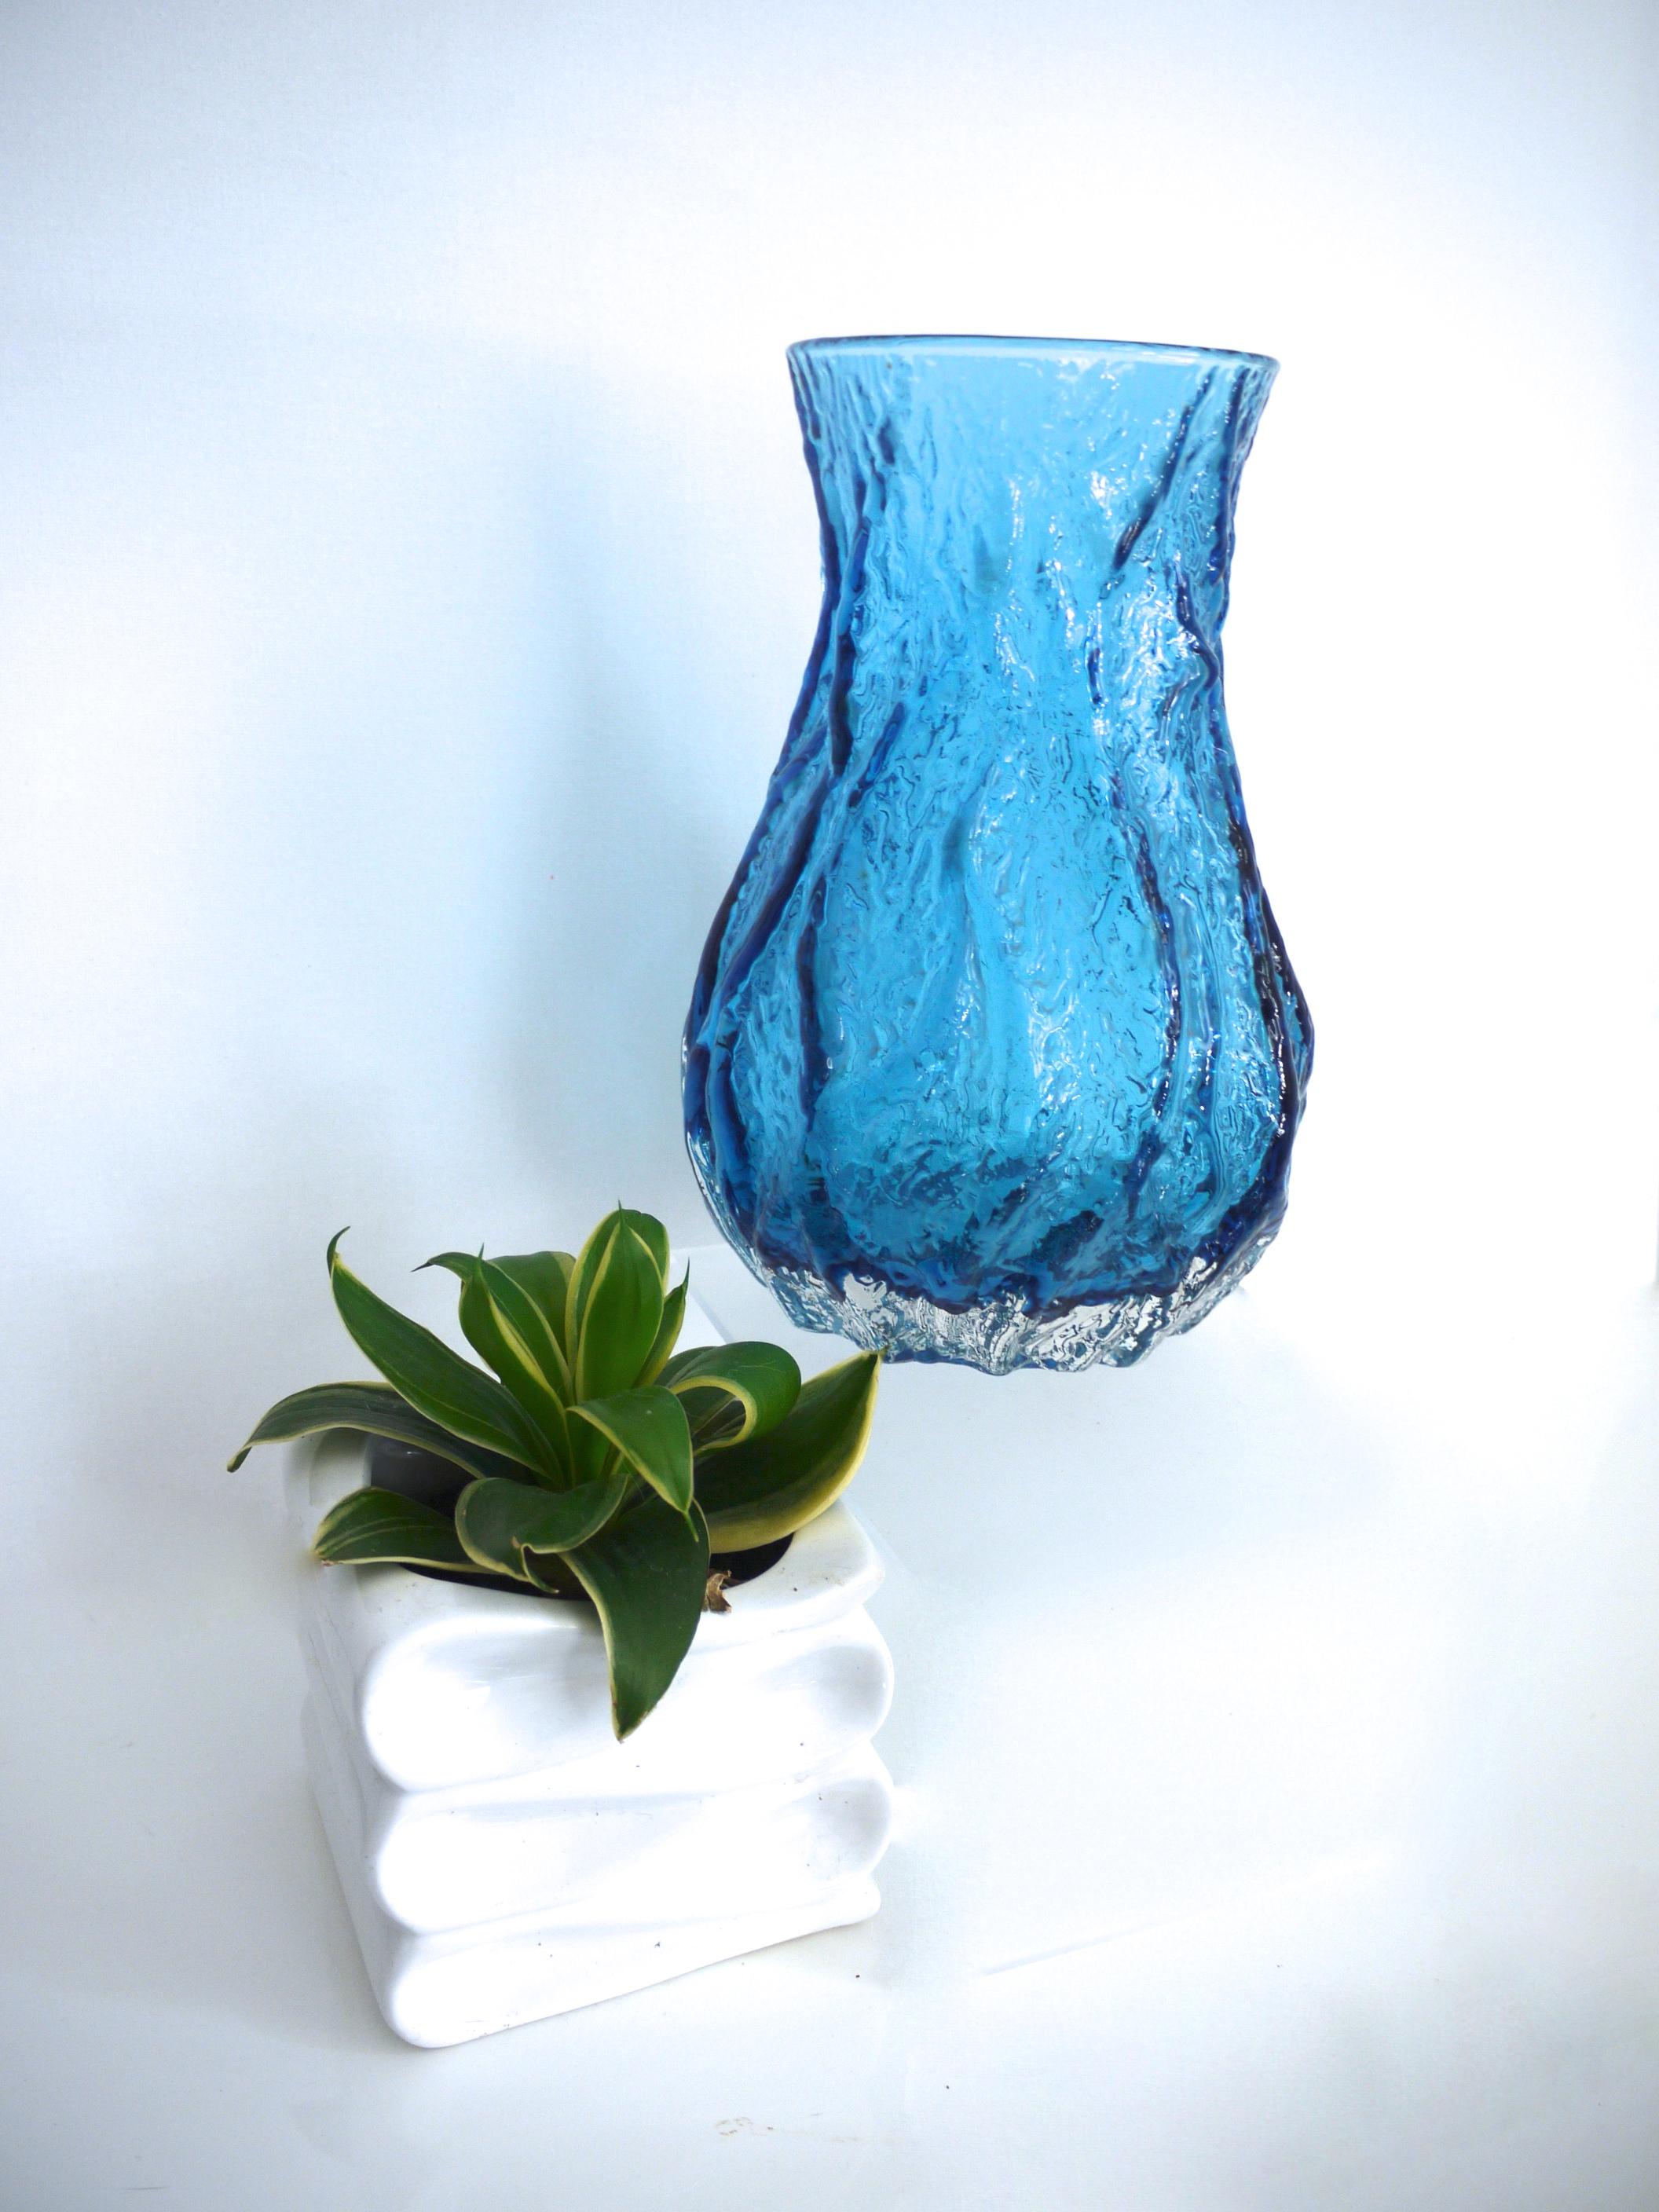 Ingridglas is also known as Ingrid Glashütte, Ingridhütte, IG Glass and Ingridglaser. This company was set up in the 1960s and folded in 1979. 
 
Among other glass pieces, Ingrid Glass are well known for their variety of textured bark vases, which